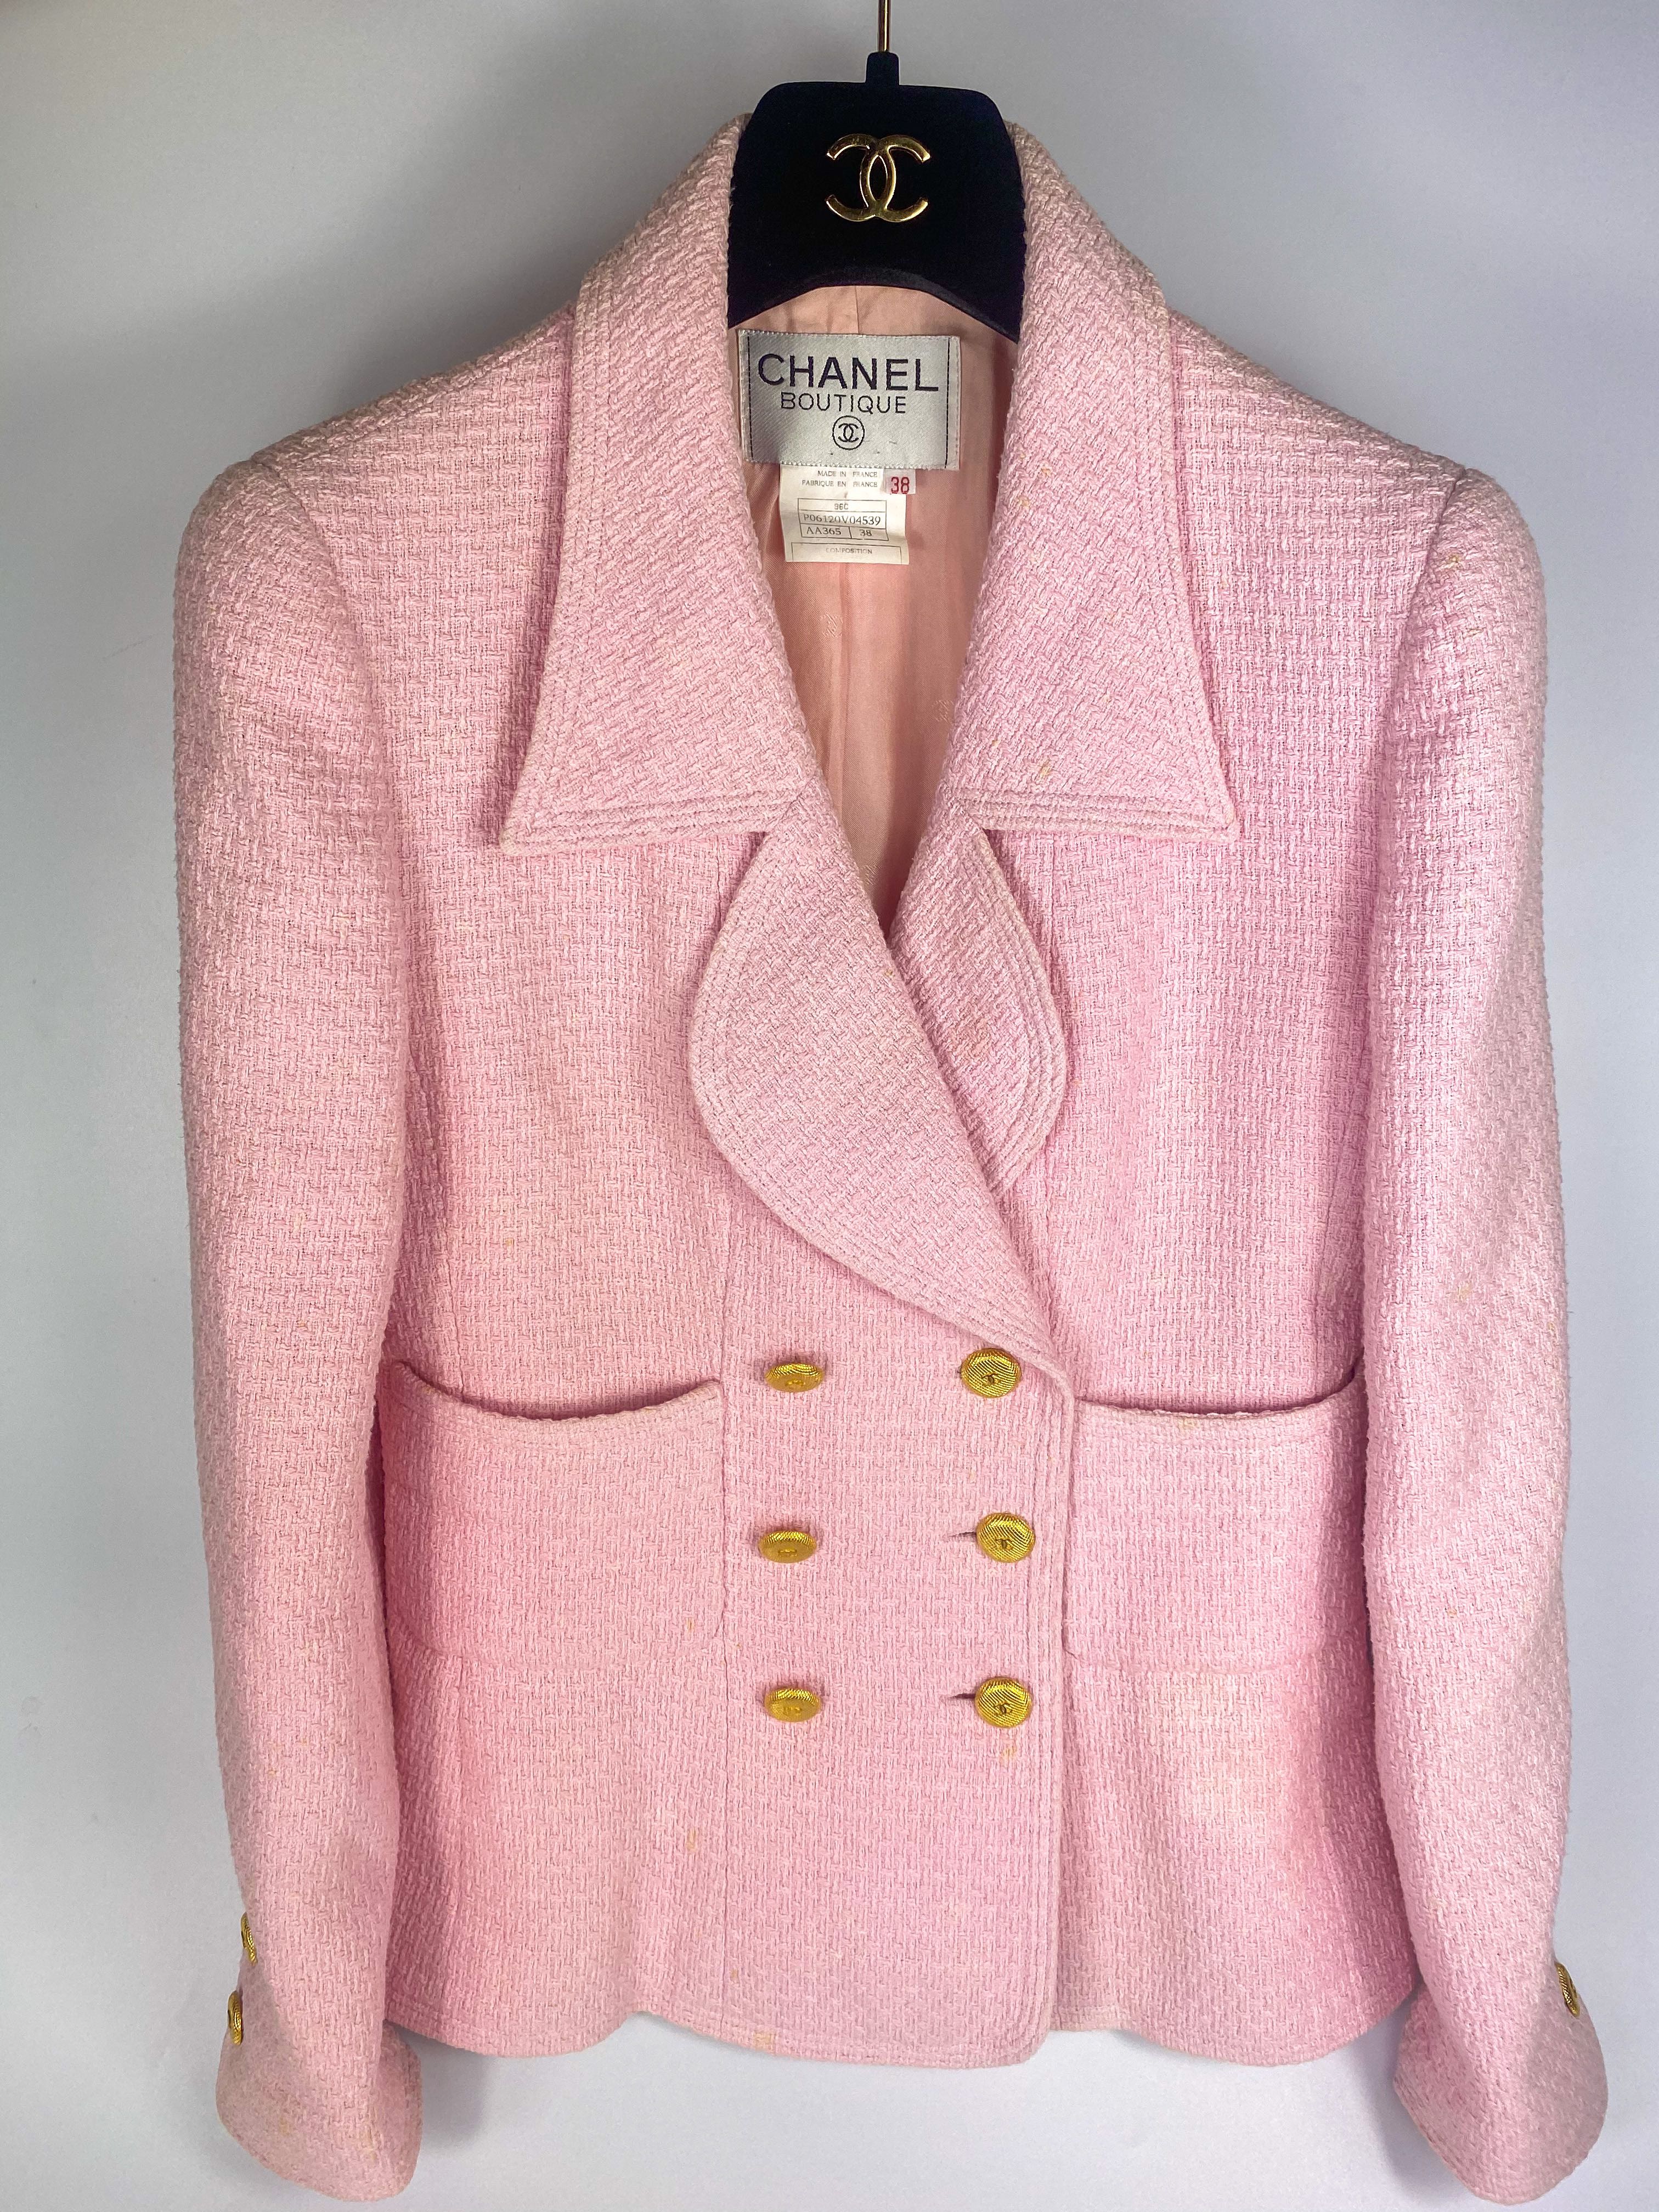 beautiful goods Chanel CHANEL jacket light pink baby pink full set 40  spring summer tweed classic go in  go in  time less  Real Yahoo auction  salling